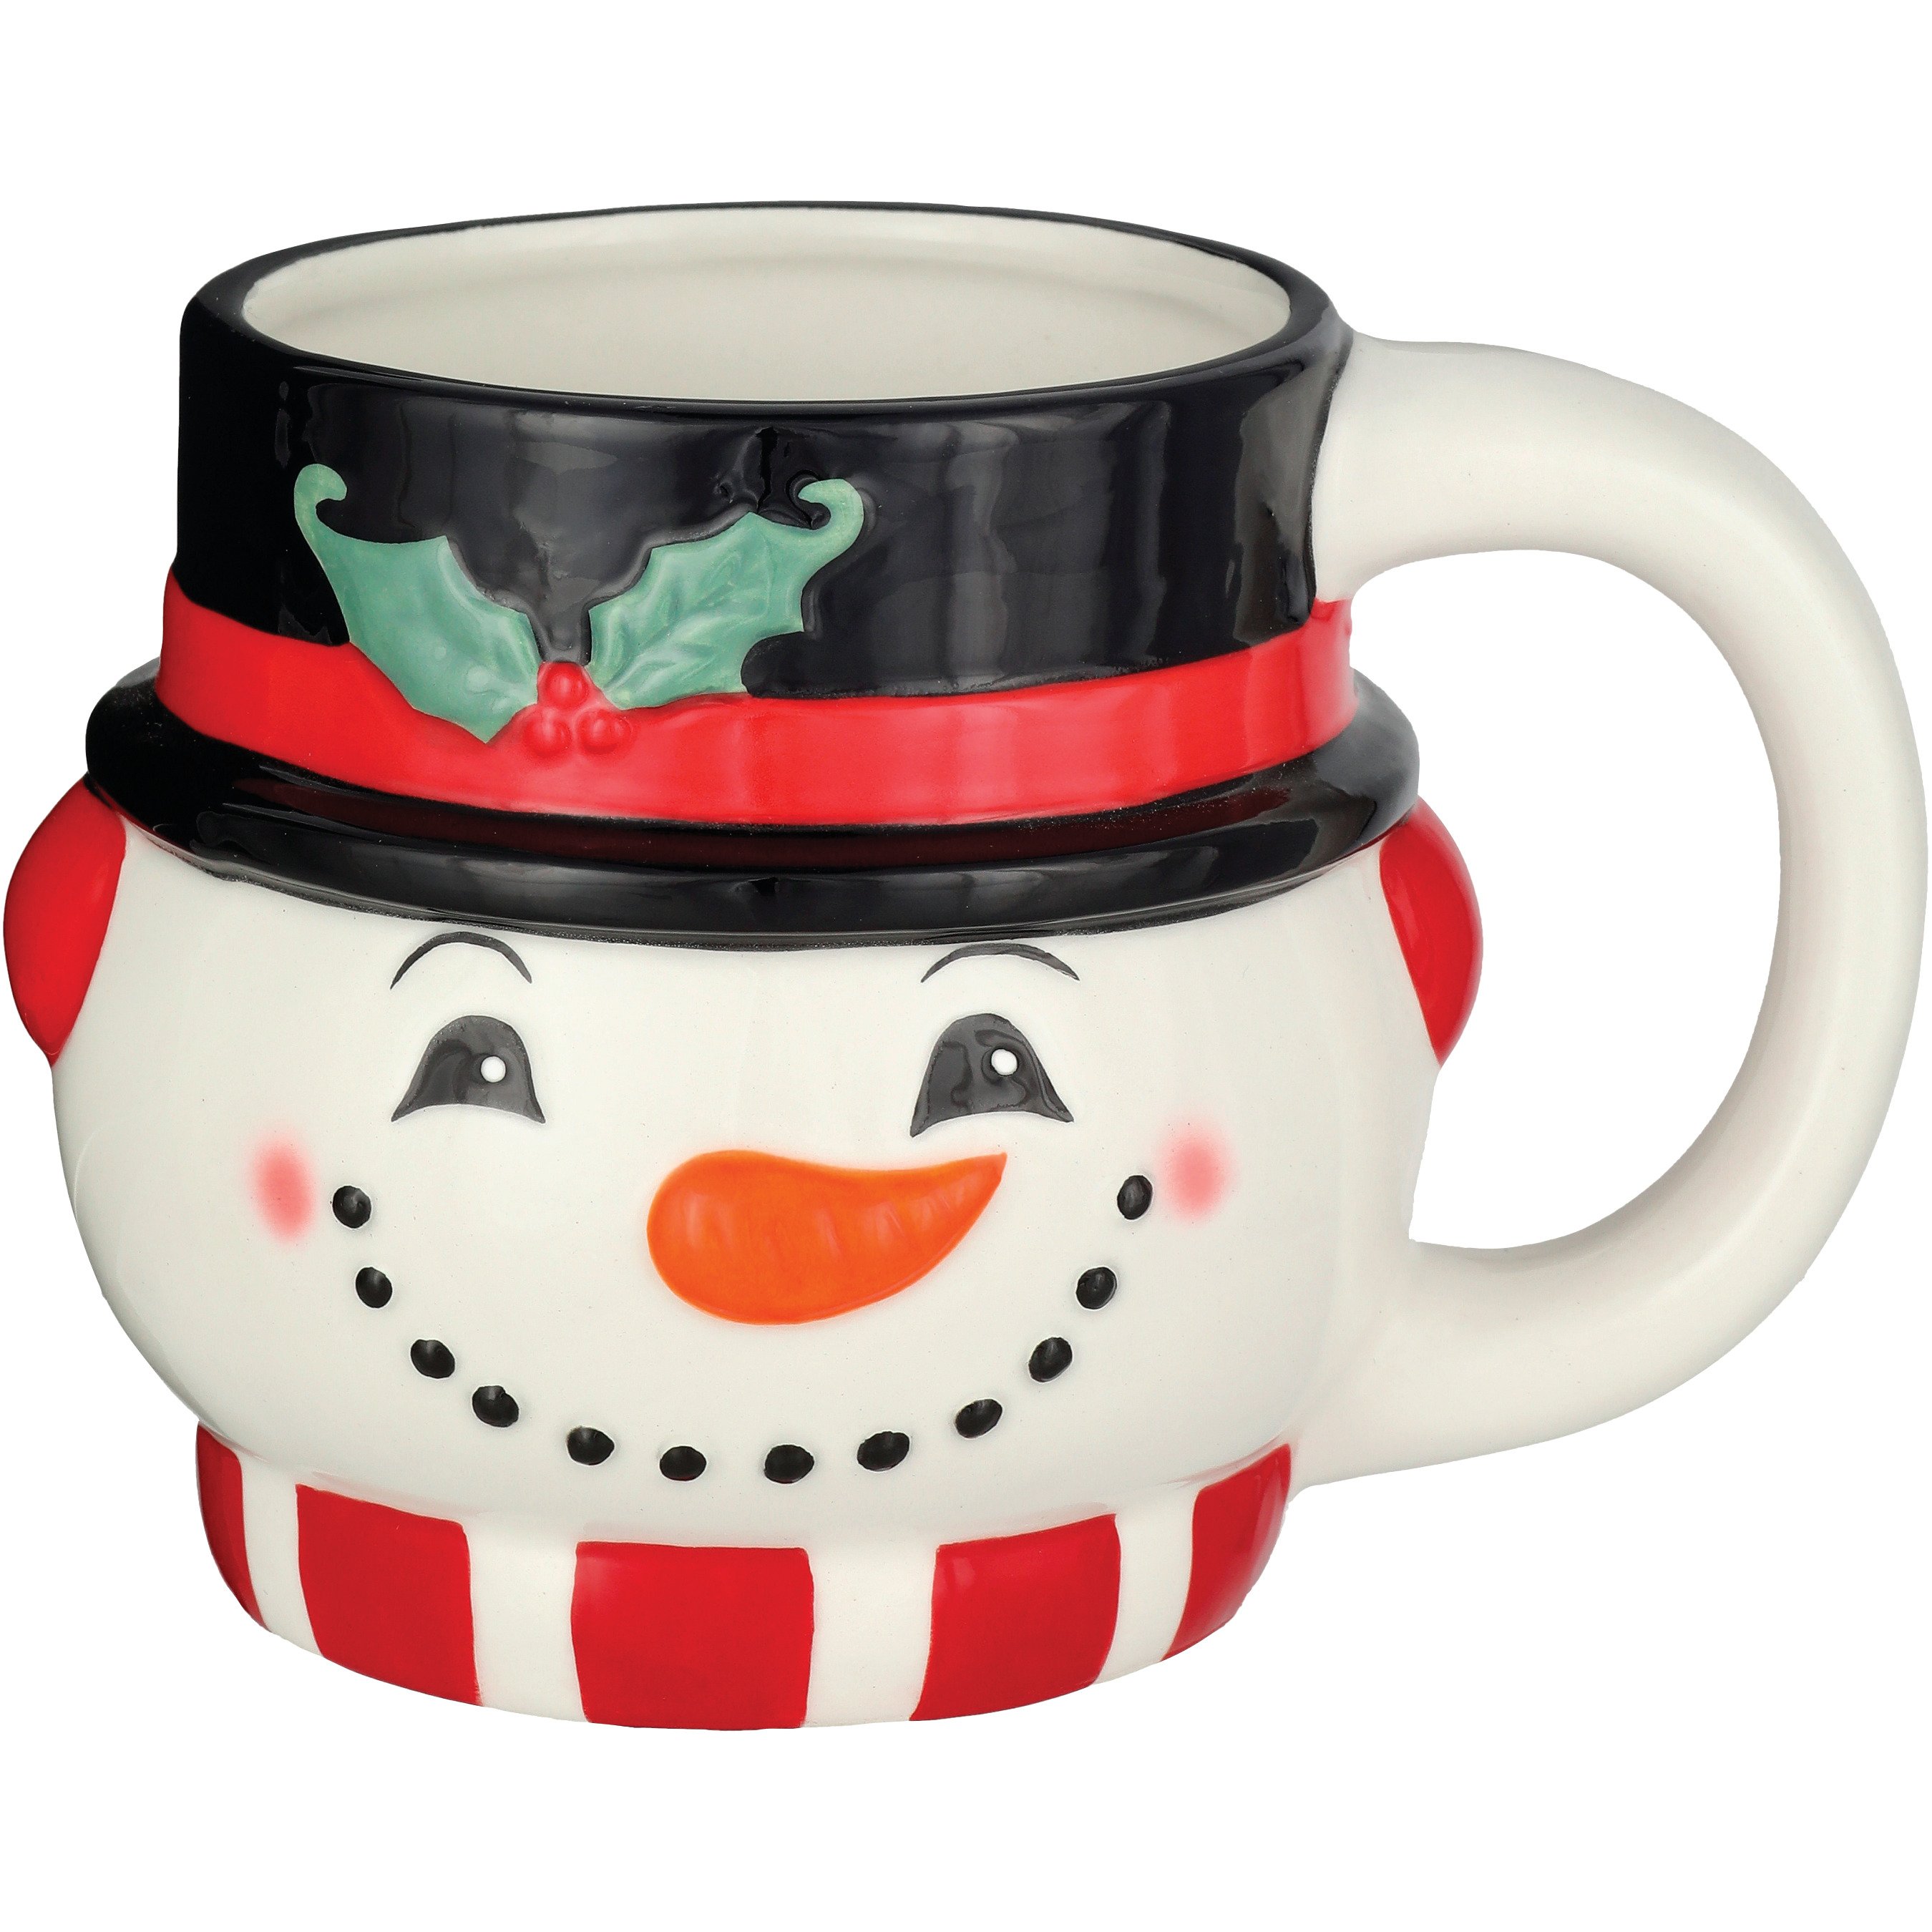 2 Denny's Restaurant Heat Activated Christmas Coffee Mugs Snowman